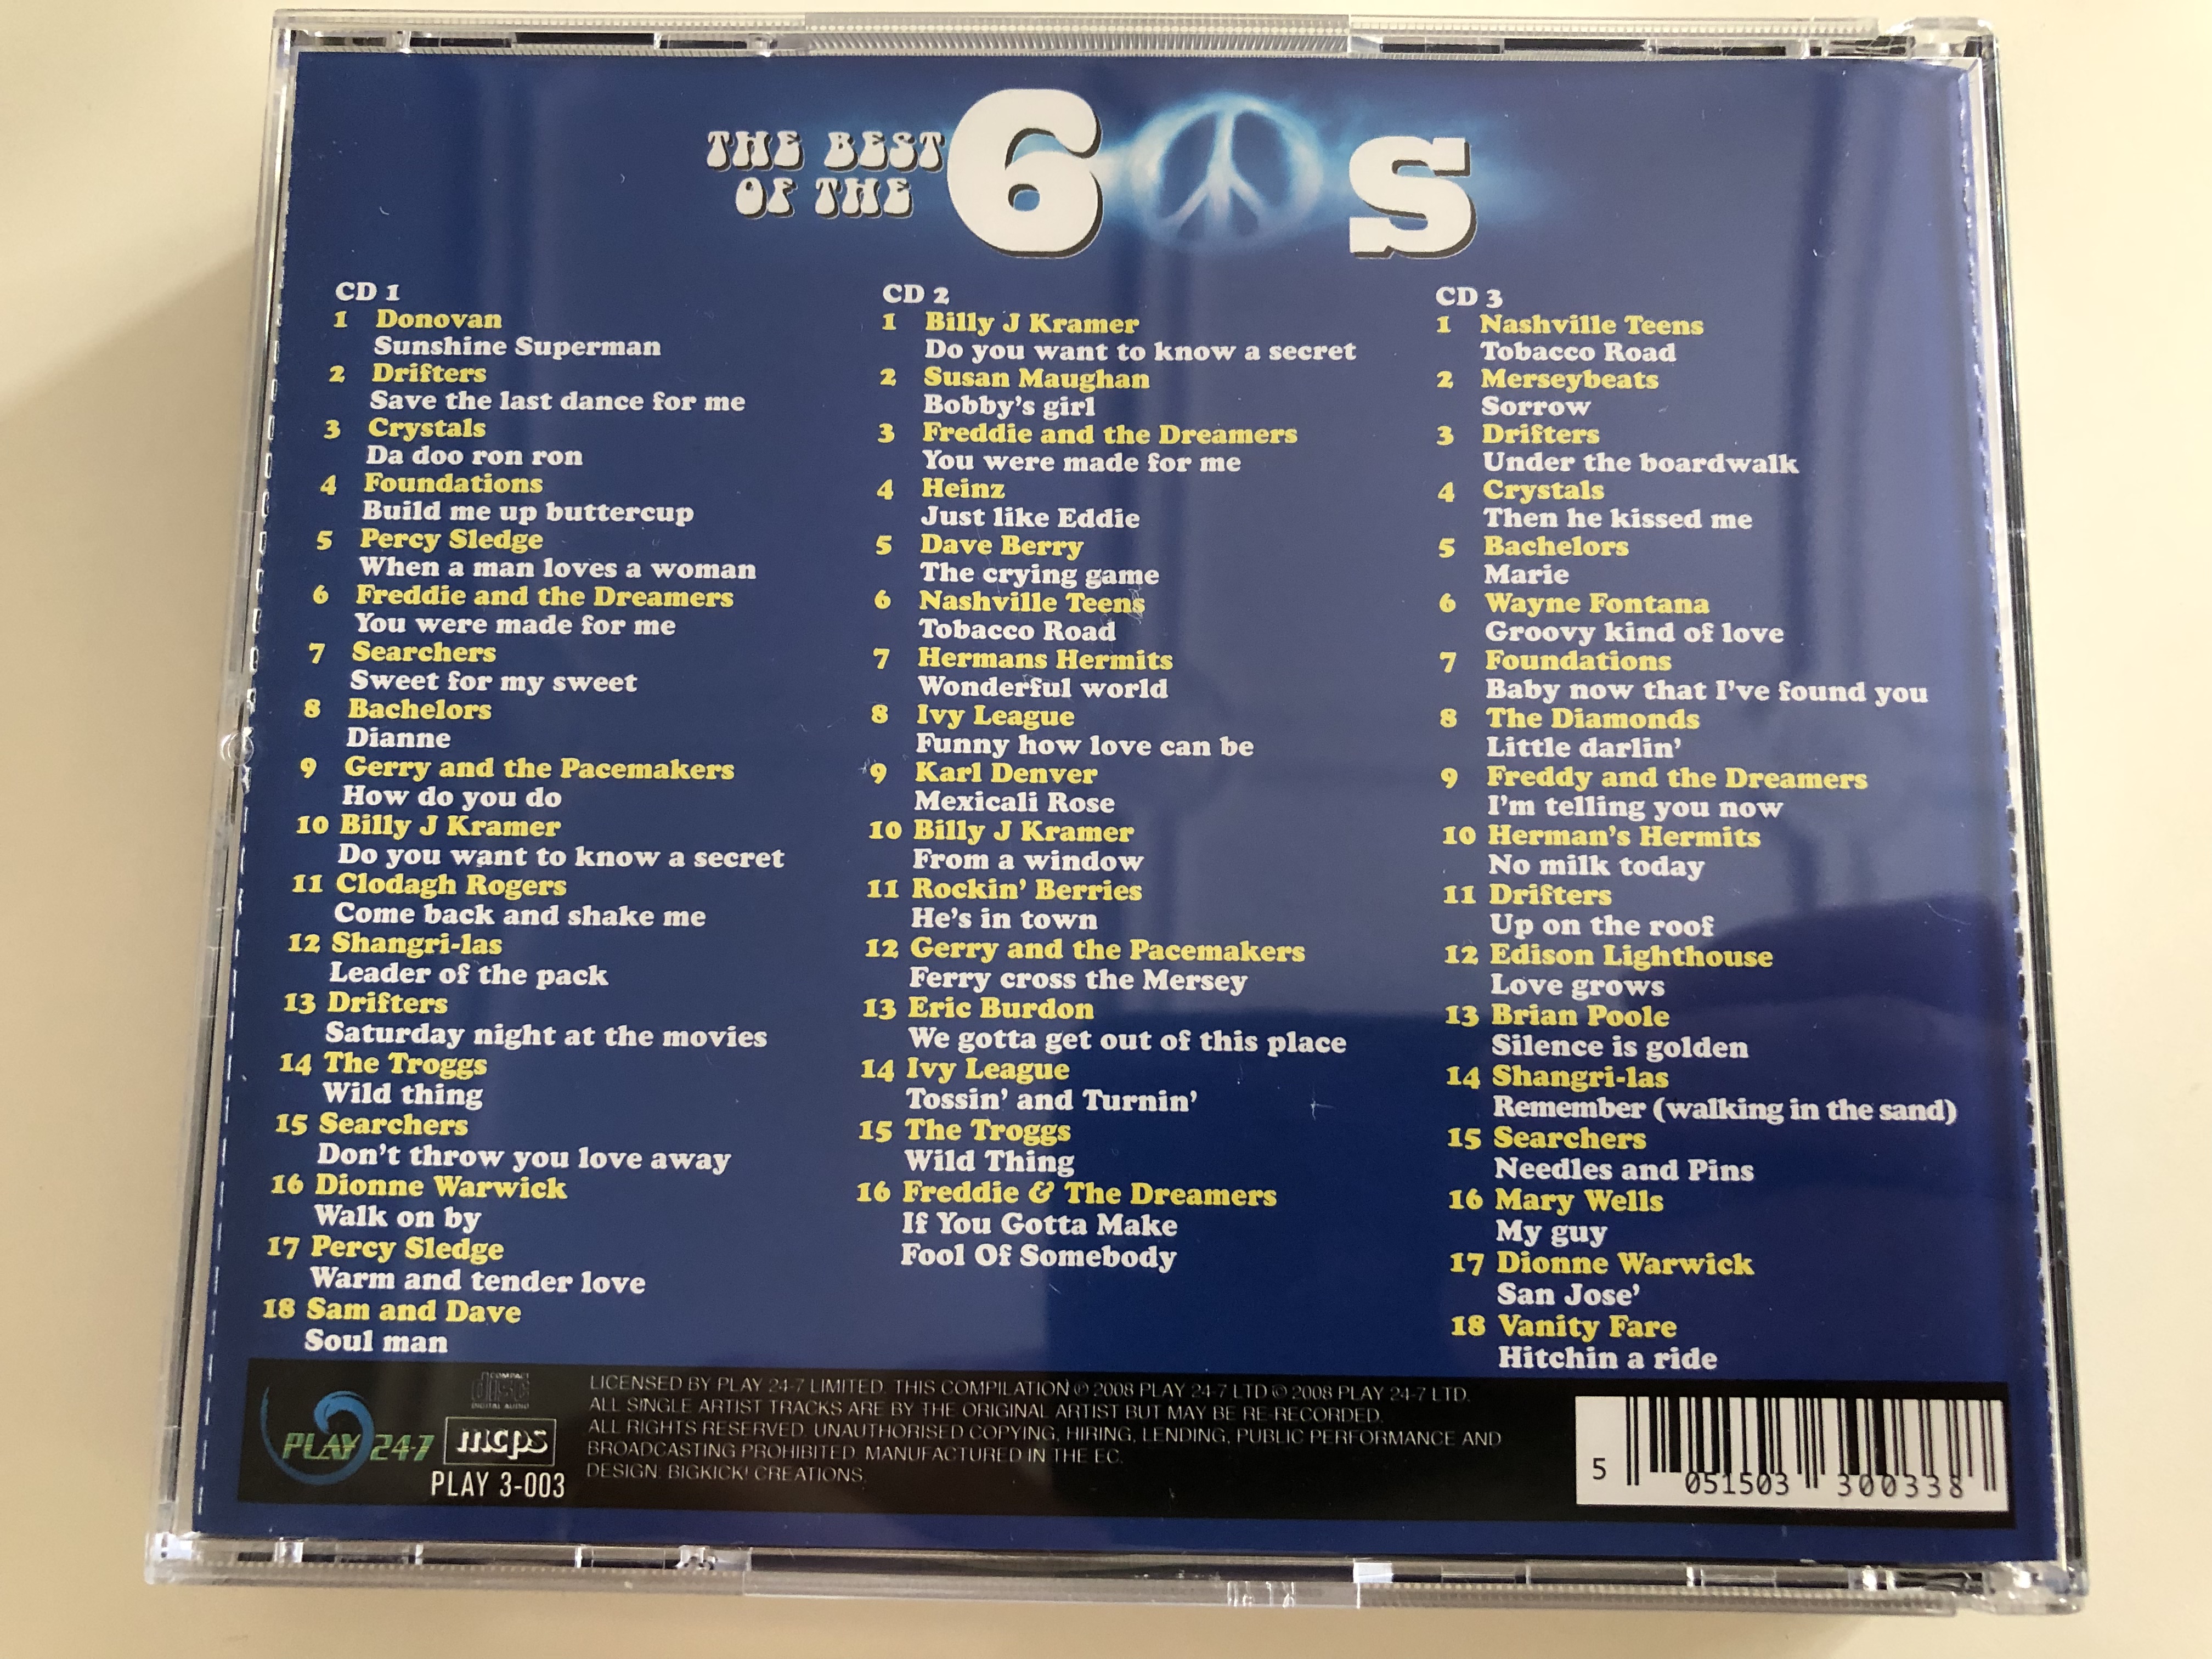 the-best-of-the-60s-the-uk-top-10-of-the-60s-the-sound-of-the-60s-3x-audio-cd-set-2008-play-3-003-9-.jpg